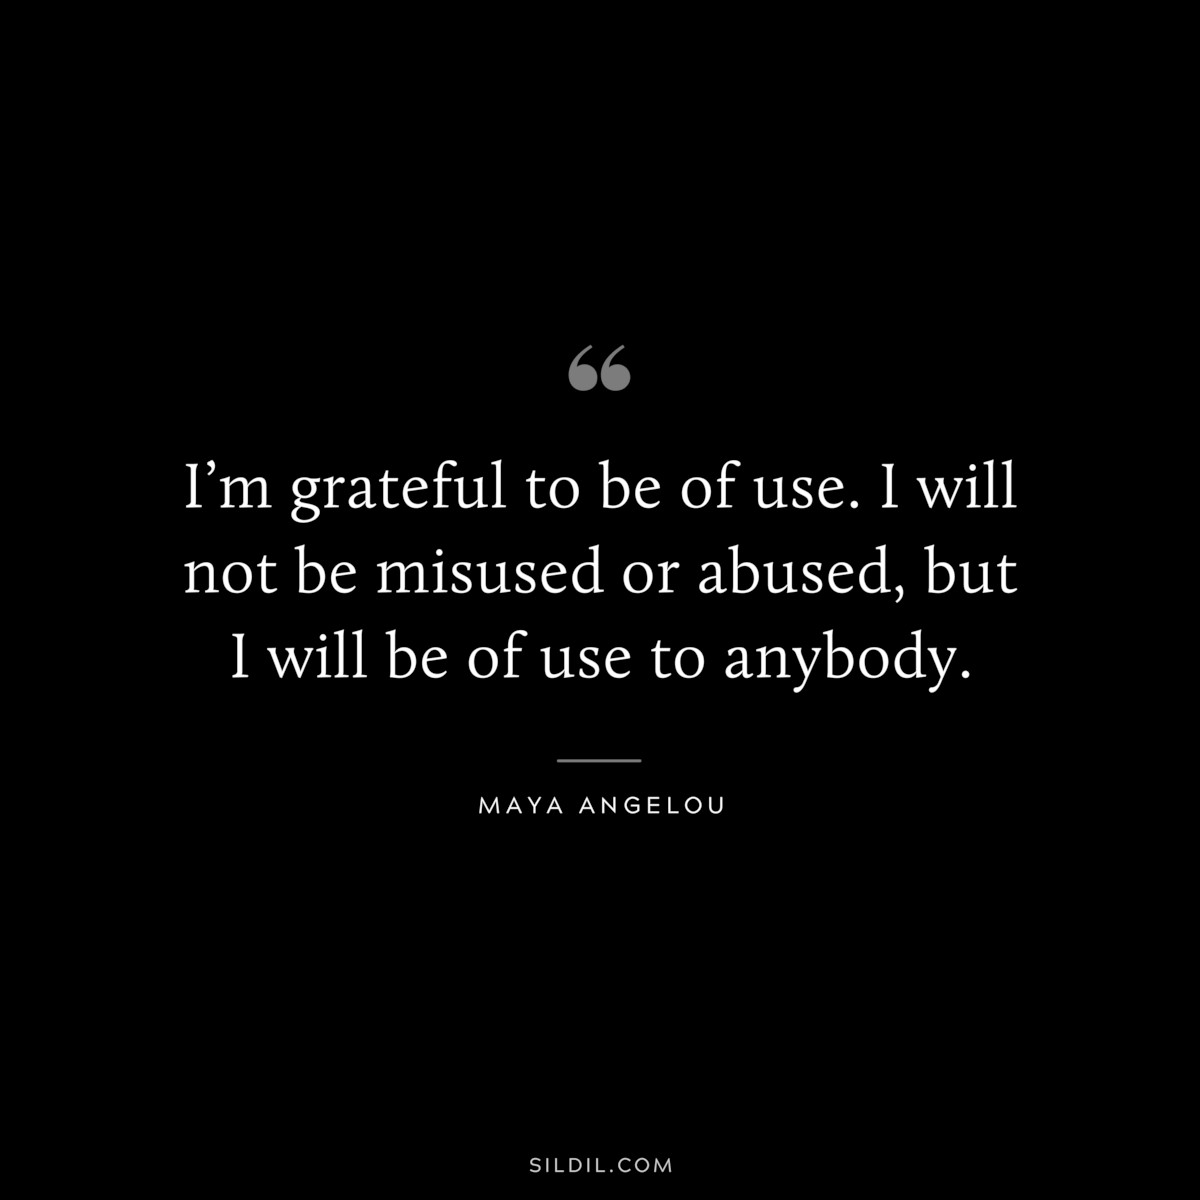 I’m grateful to be of use. I will not be misused or abused, but I will be of use to anybody. ― Maya Angelou